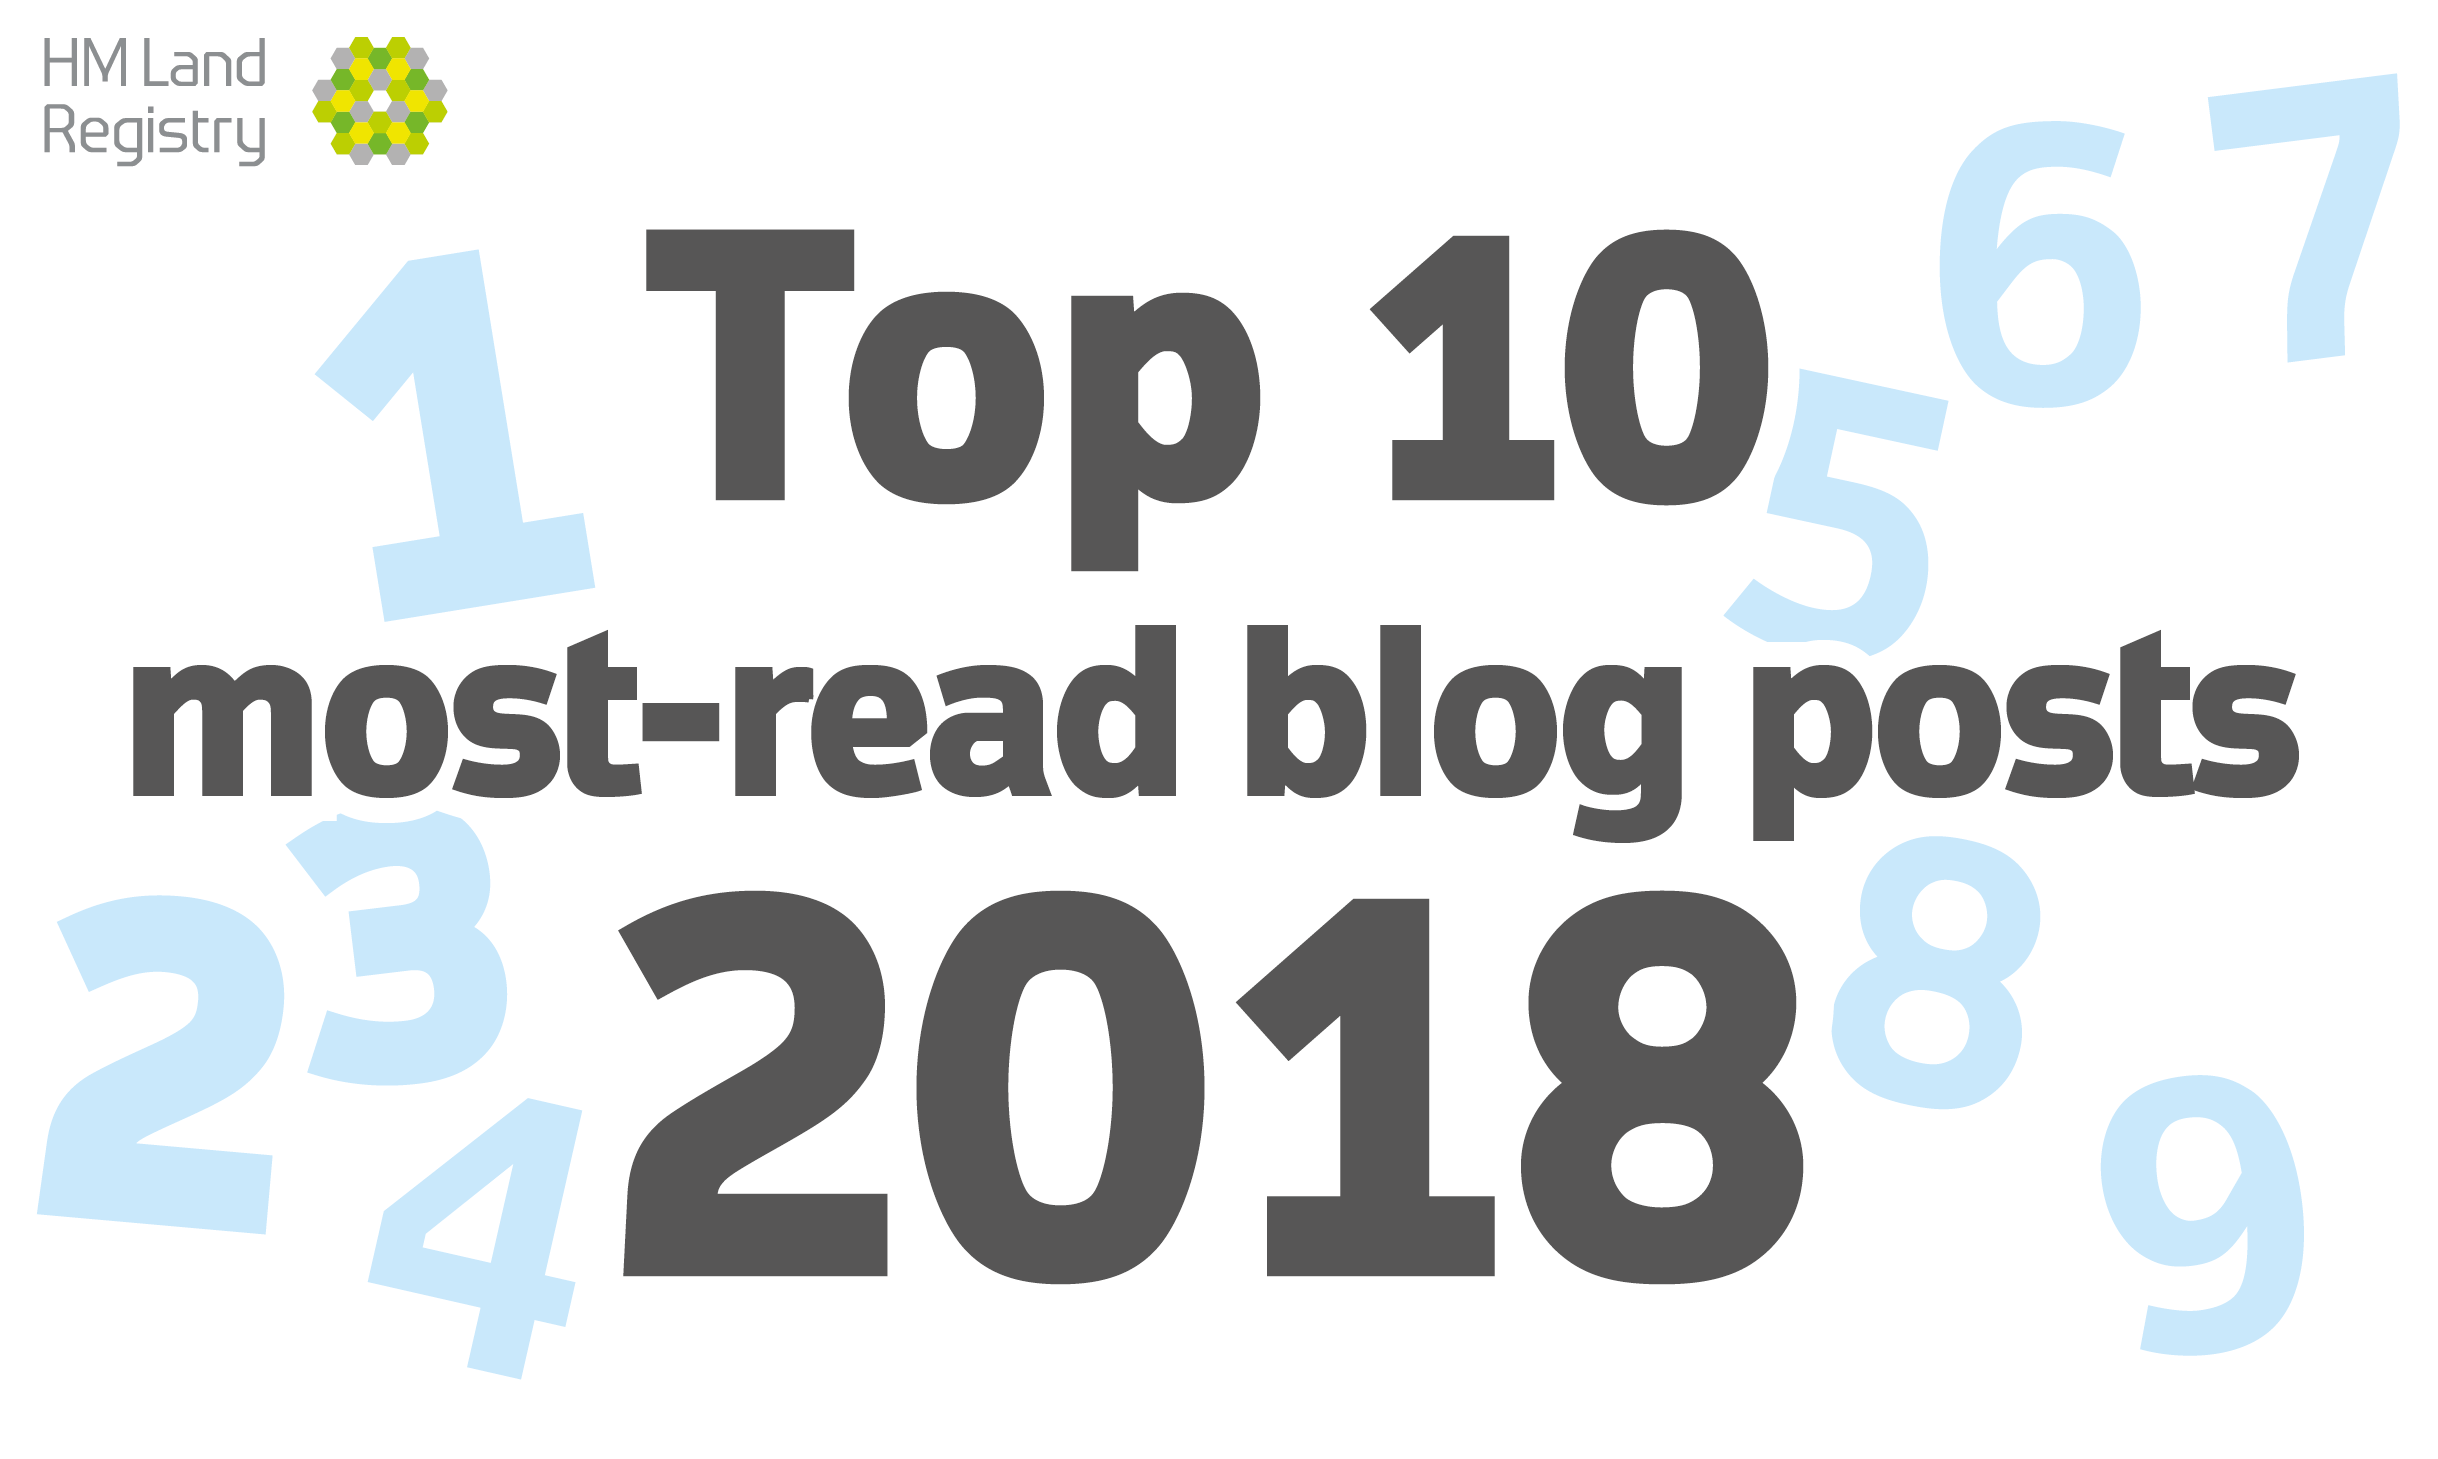 Graphic text saying 'Top 10 most-read blog posts 2018' 